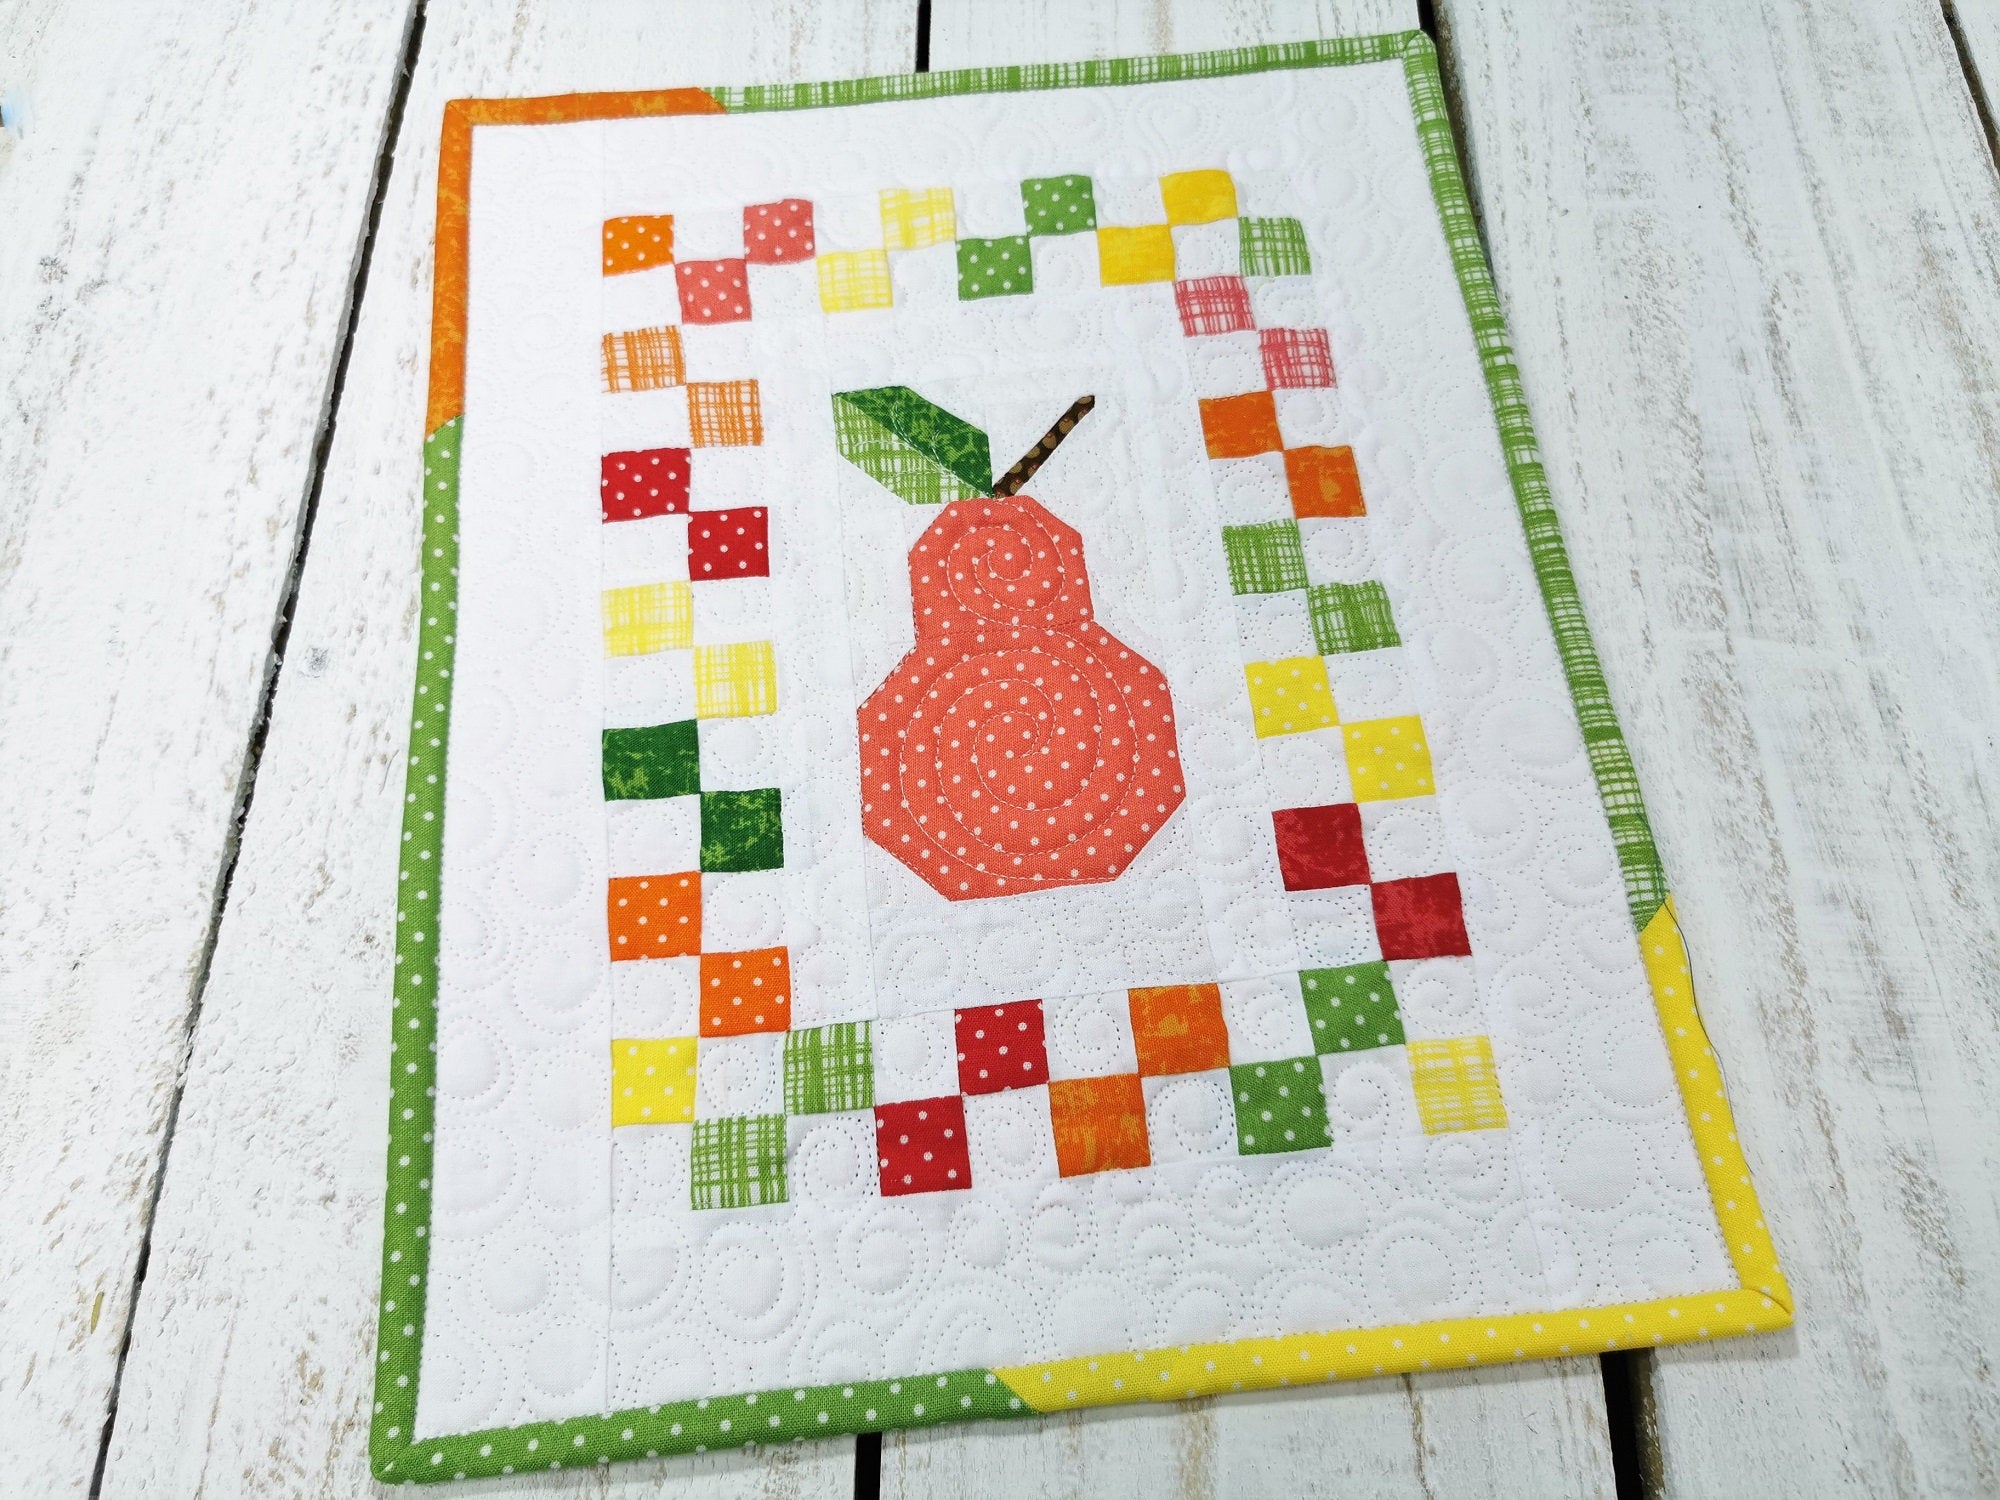 This improv patchwork pear quilt is perfect for decorating. Bright and colorful it is perfect for summer. Colors include yellow, green, orange, red, coral on a white background. Custom quilting adds beautiful detail. One-of-a-kind!